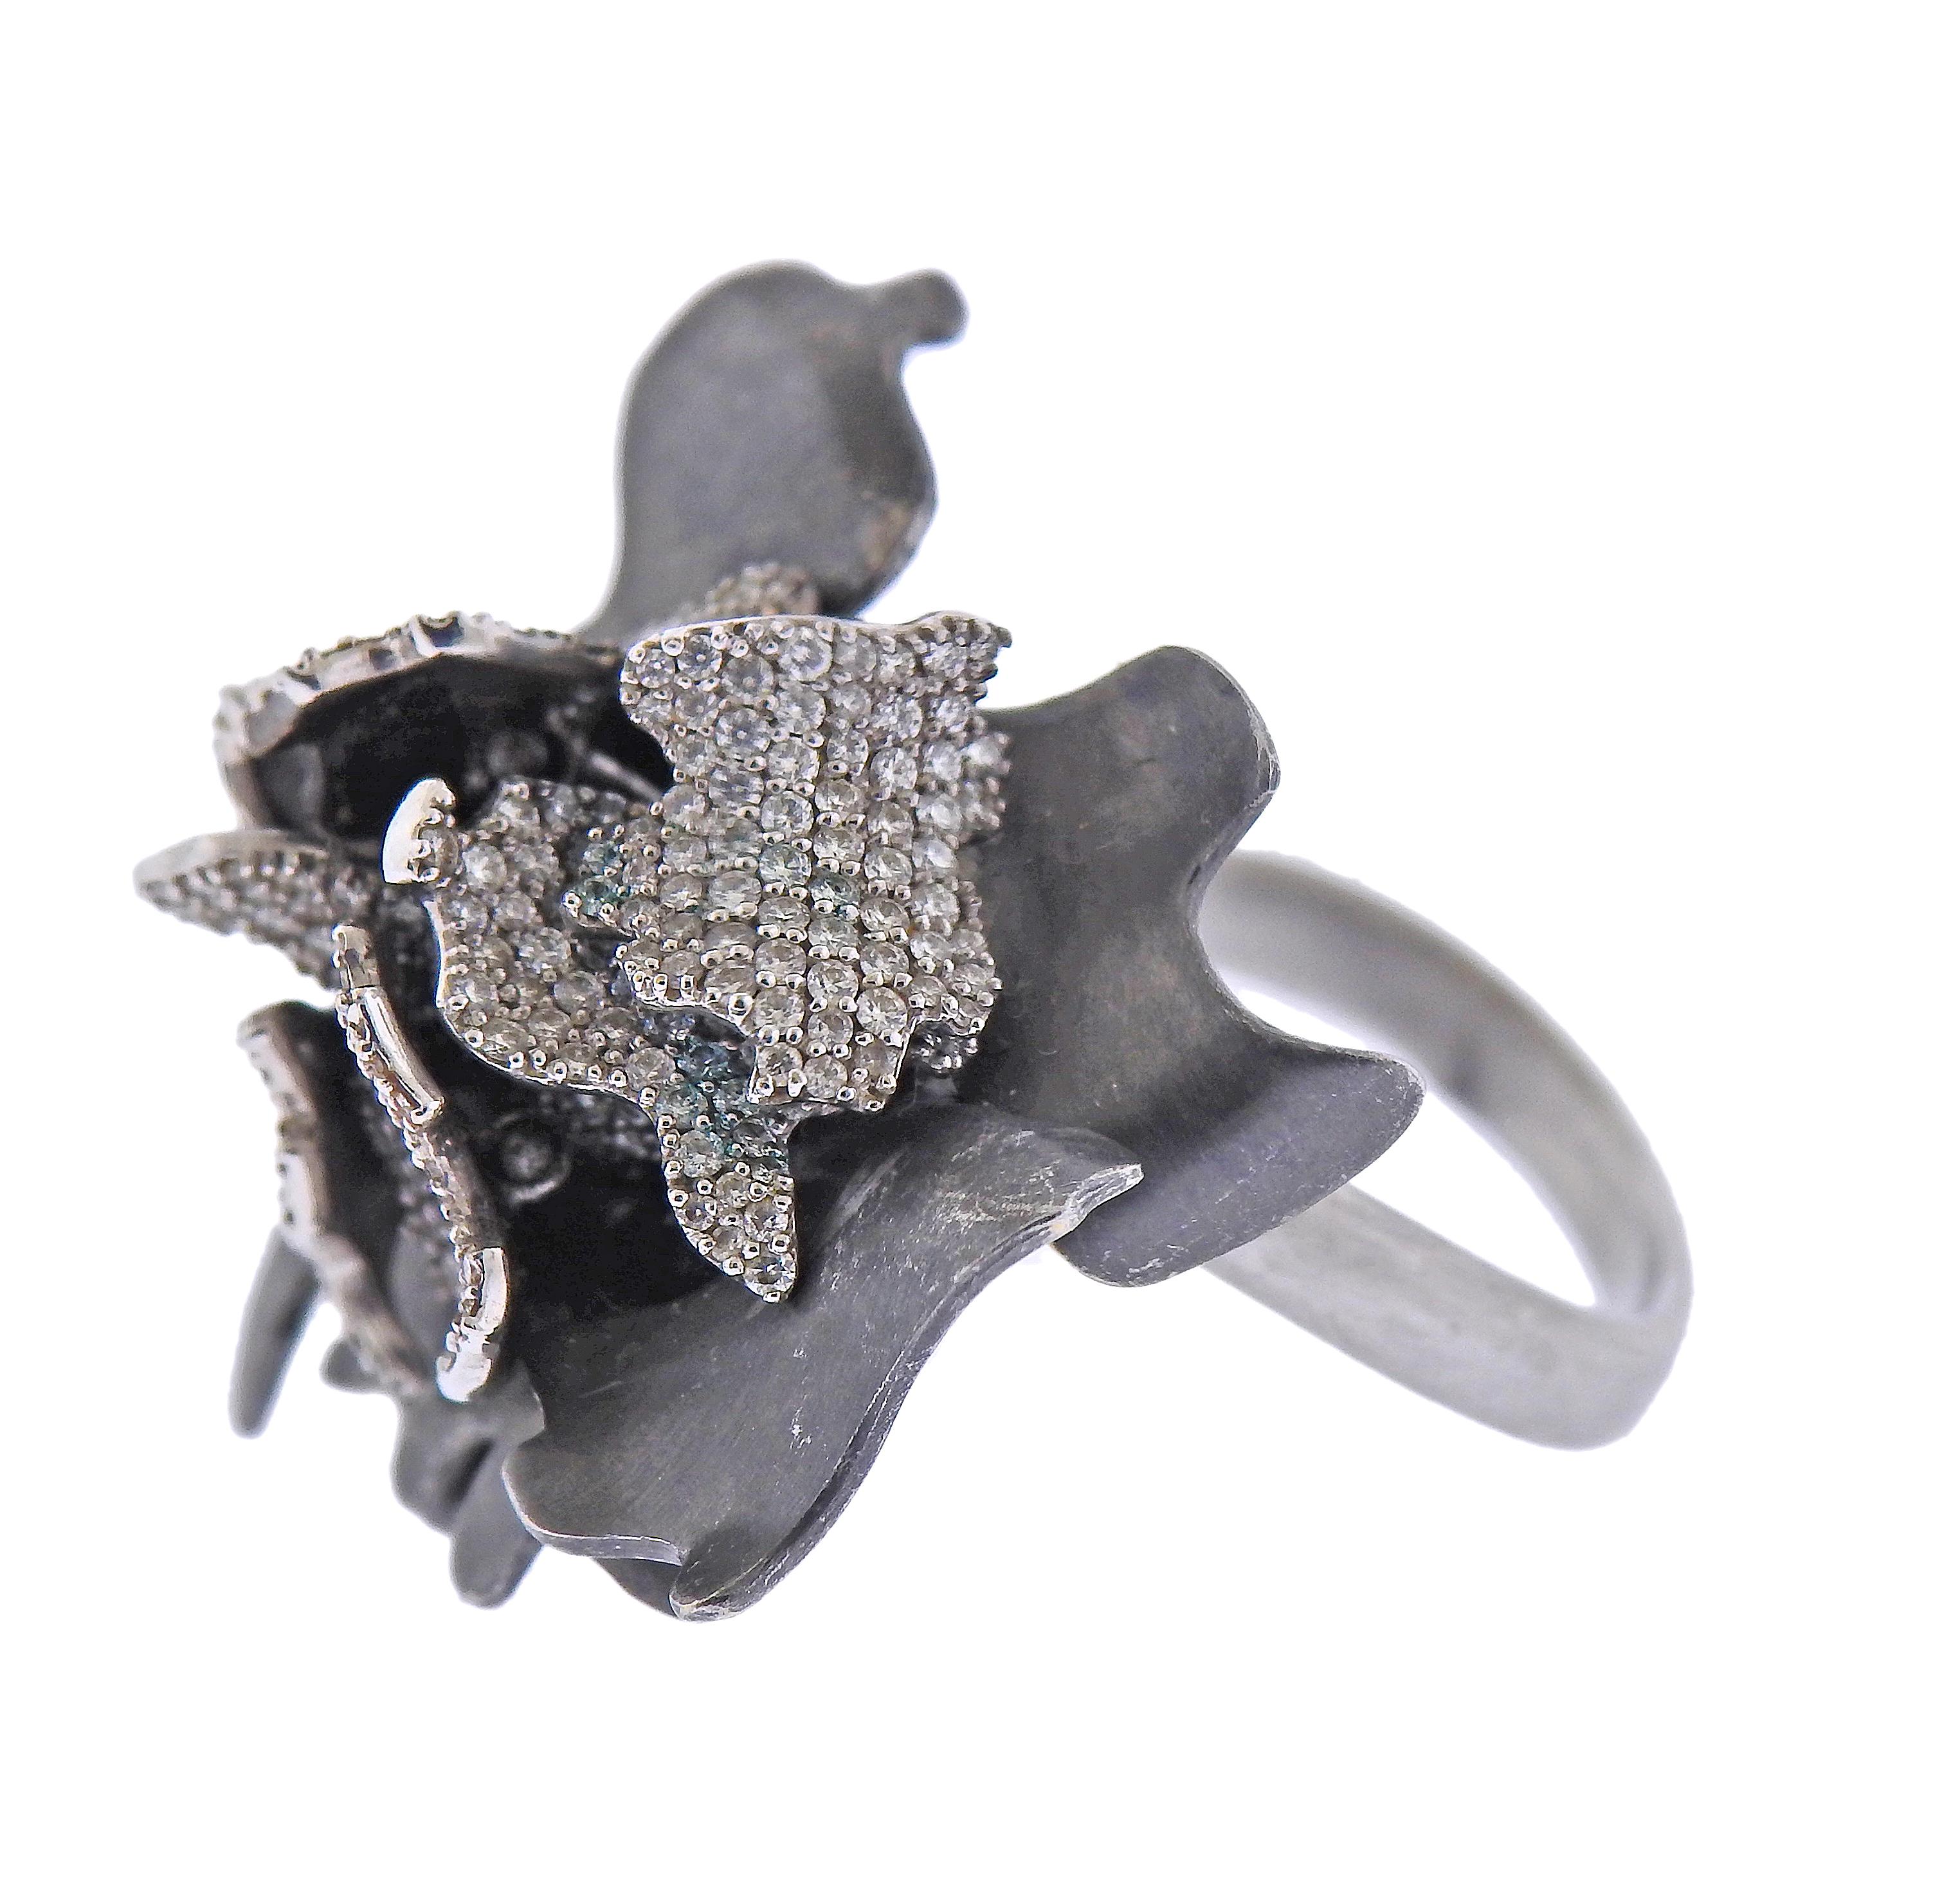 18k blackened gold flower ring, designed by Frank Gehry for Tiffany & Co, with approx. 0.46ctw in diamonds, featuring movable petals/leaves. Ring size - 7, ring top - 25mm x 26mm. Marked: Gehry, Tiffany & Co, 750. Weight - 11.8 grams. 